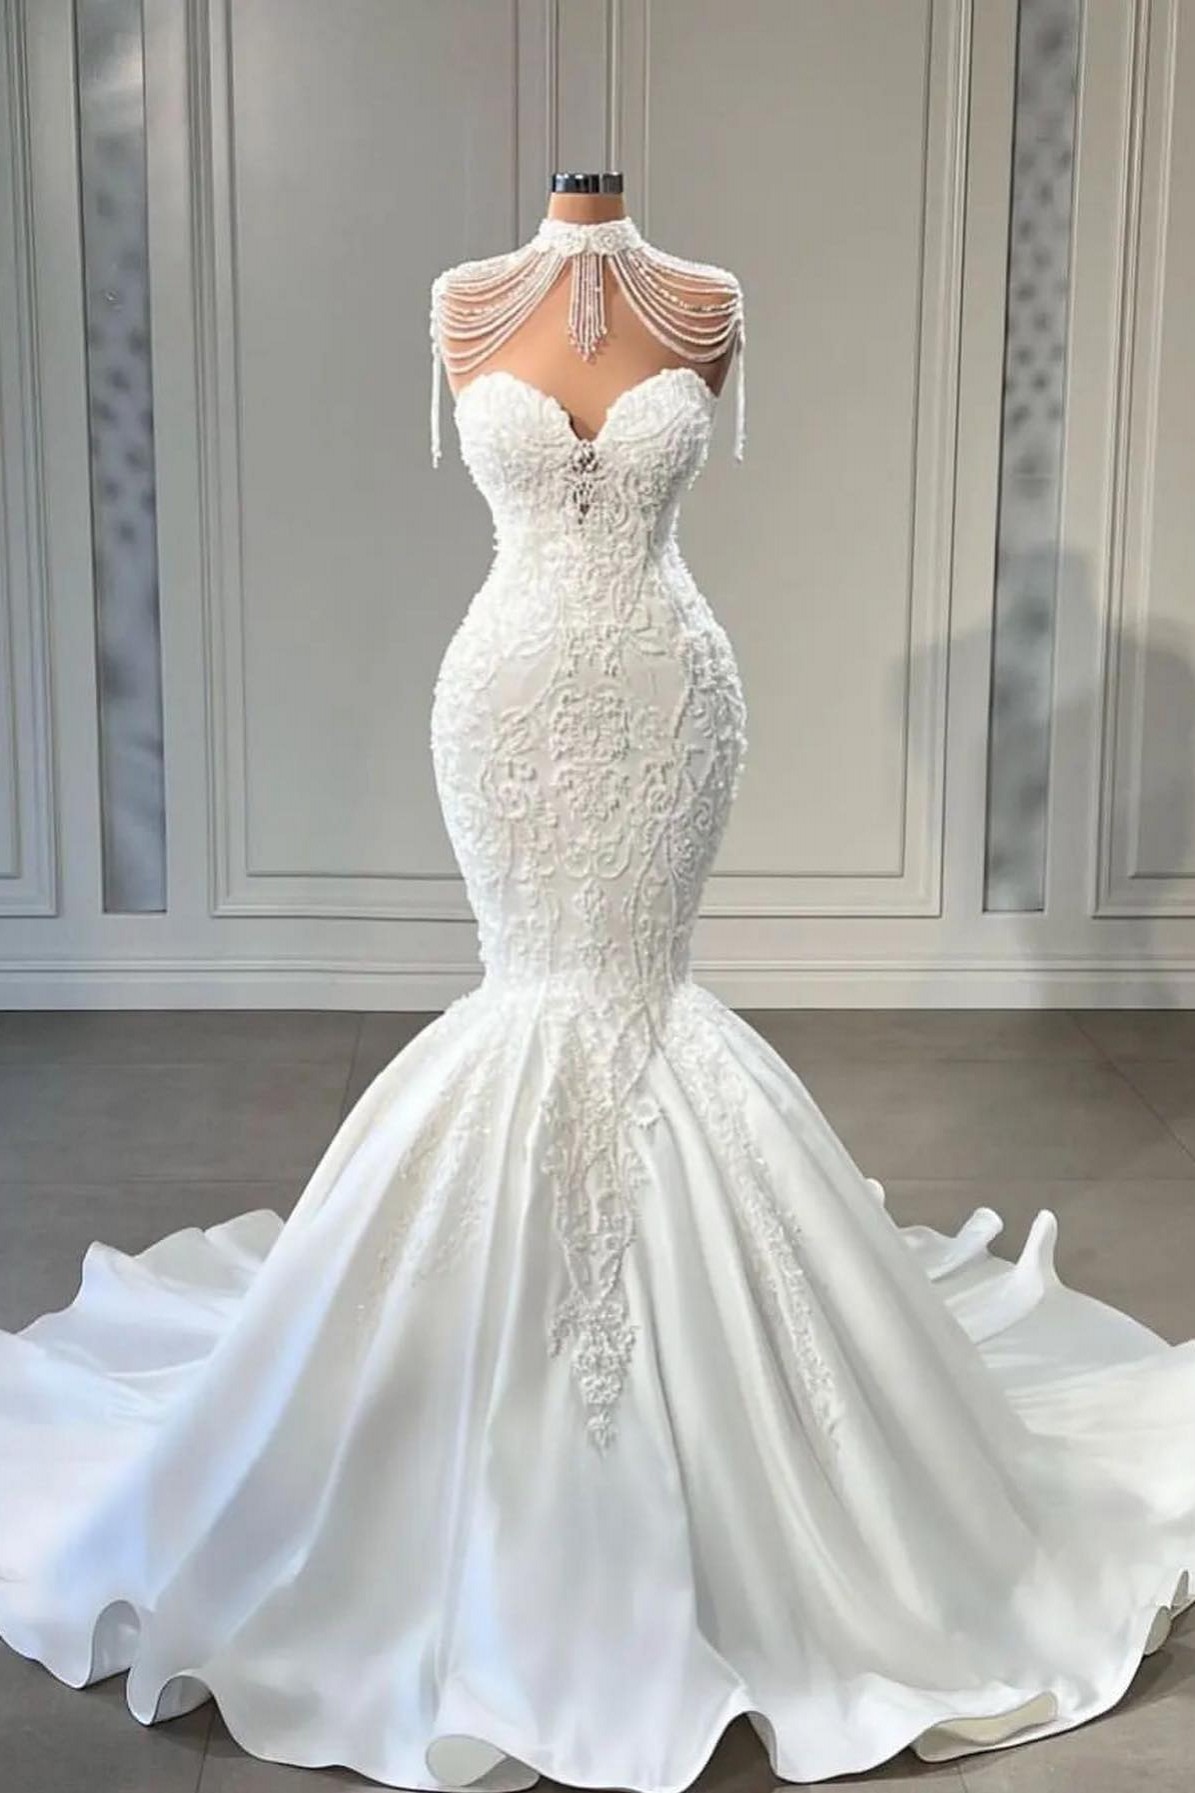 Modest Long Mermaid Sweetheart Pearl Wedding Dress With Lace - lulusllly